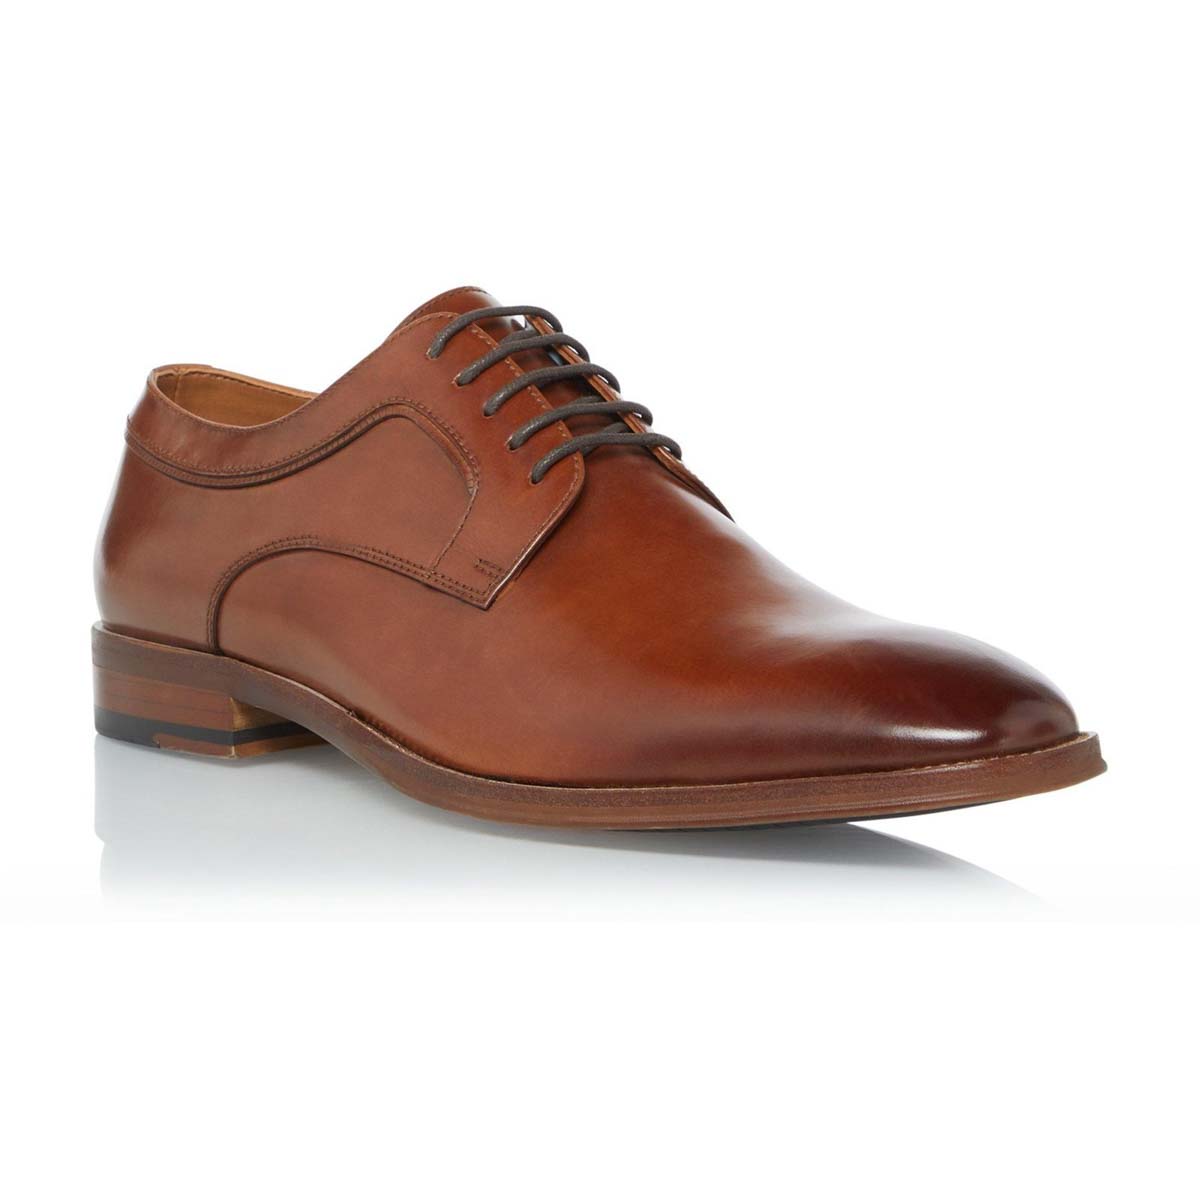 Dune London Sparrows Tan Mens formal shoes 2775095201655 in a Plain Leather in Size 12